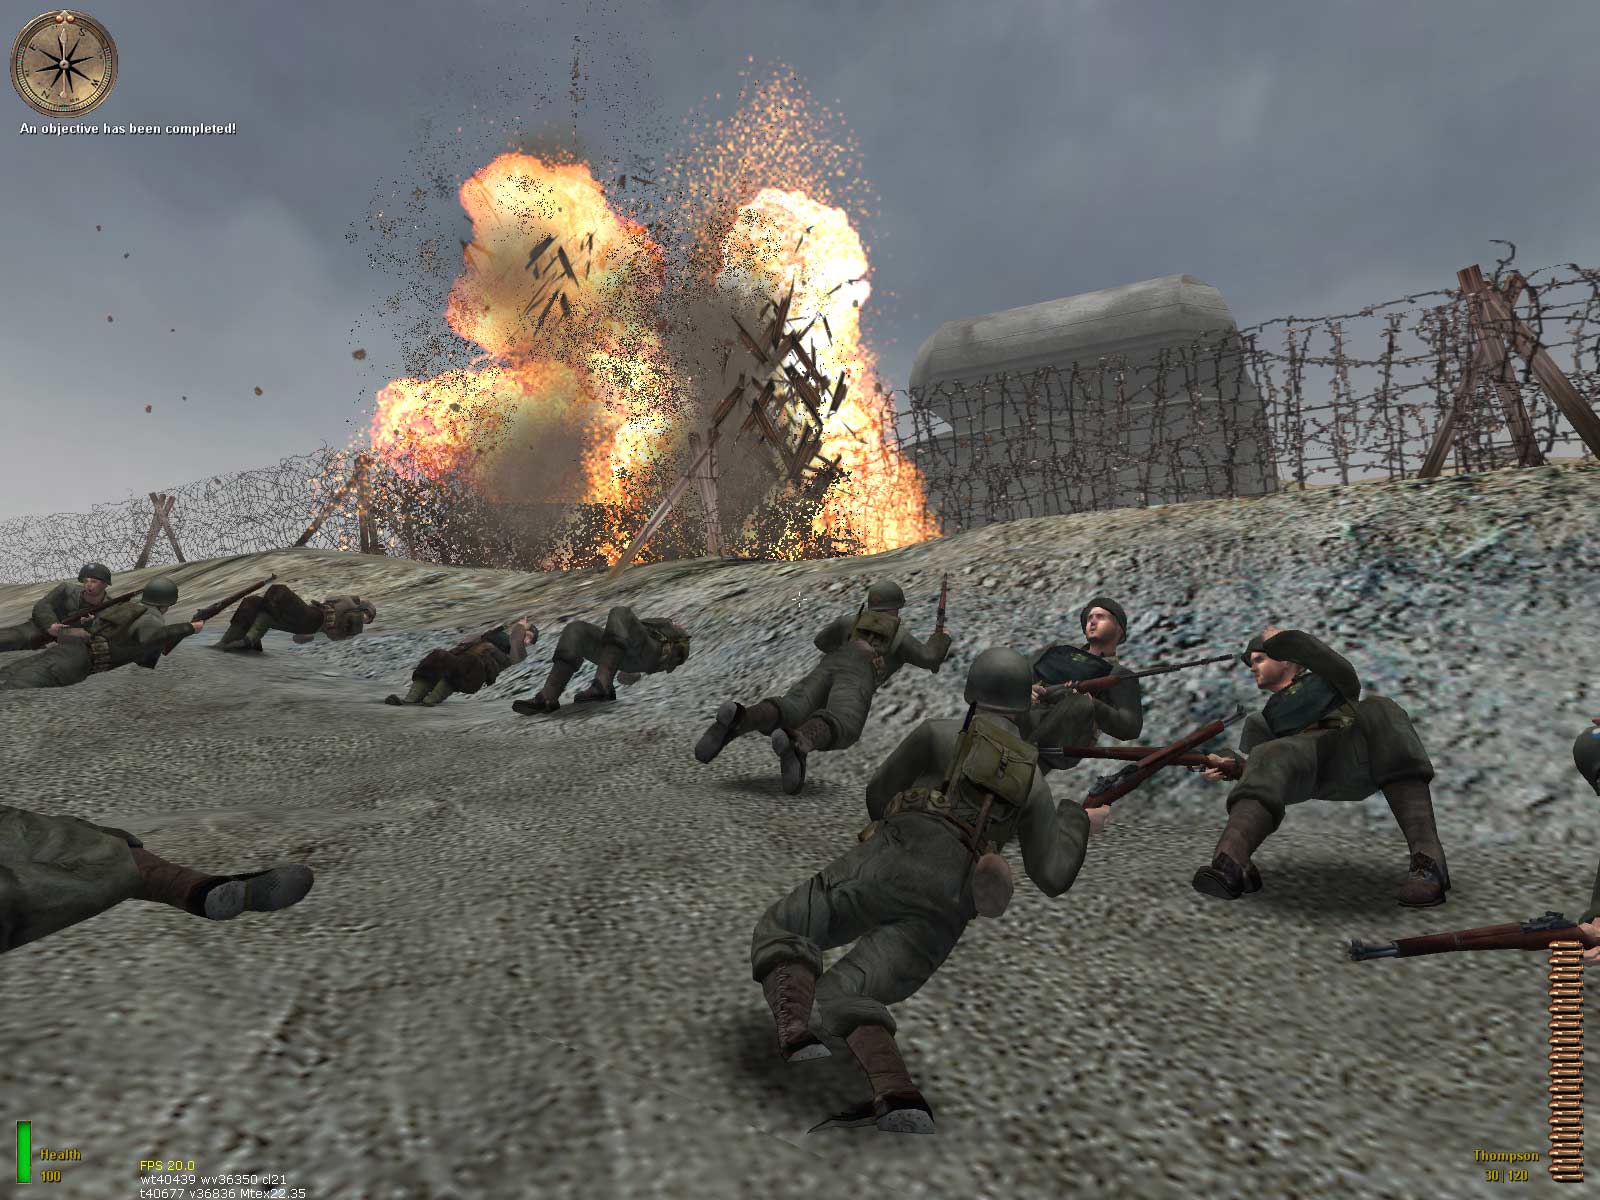 Medal of Honor: Allied Assault download